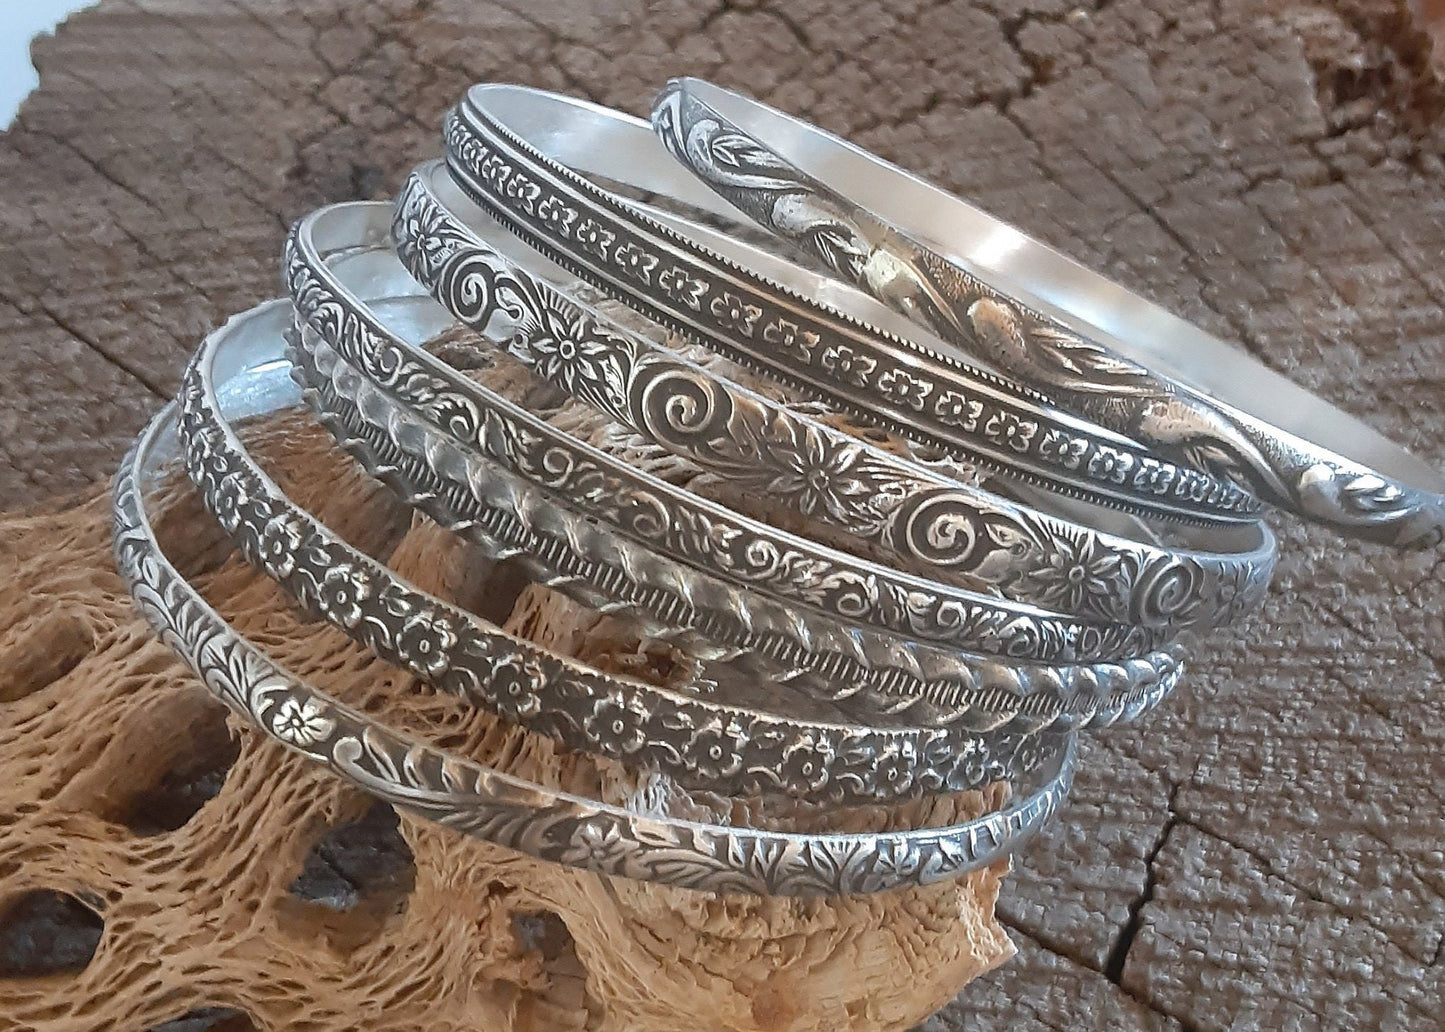 Bangle set of 7 different bangles in sterling silver - choose your size and quantity